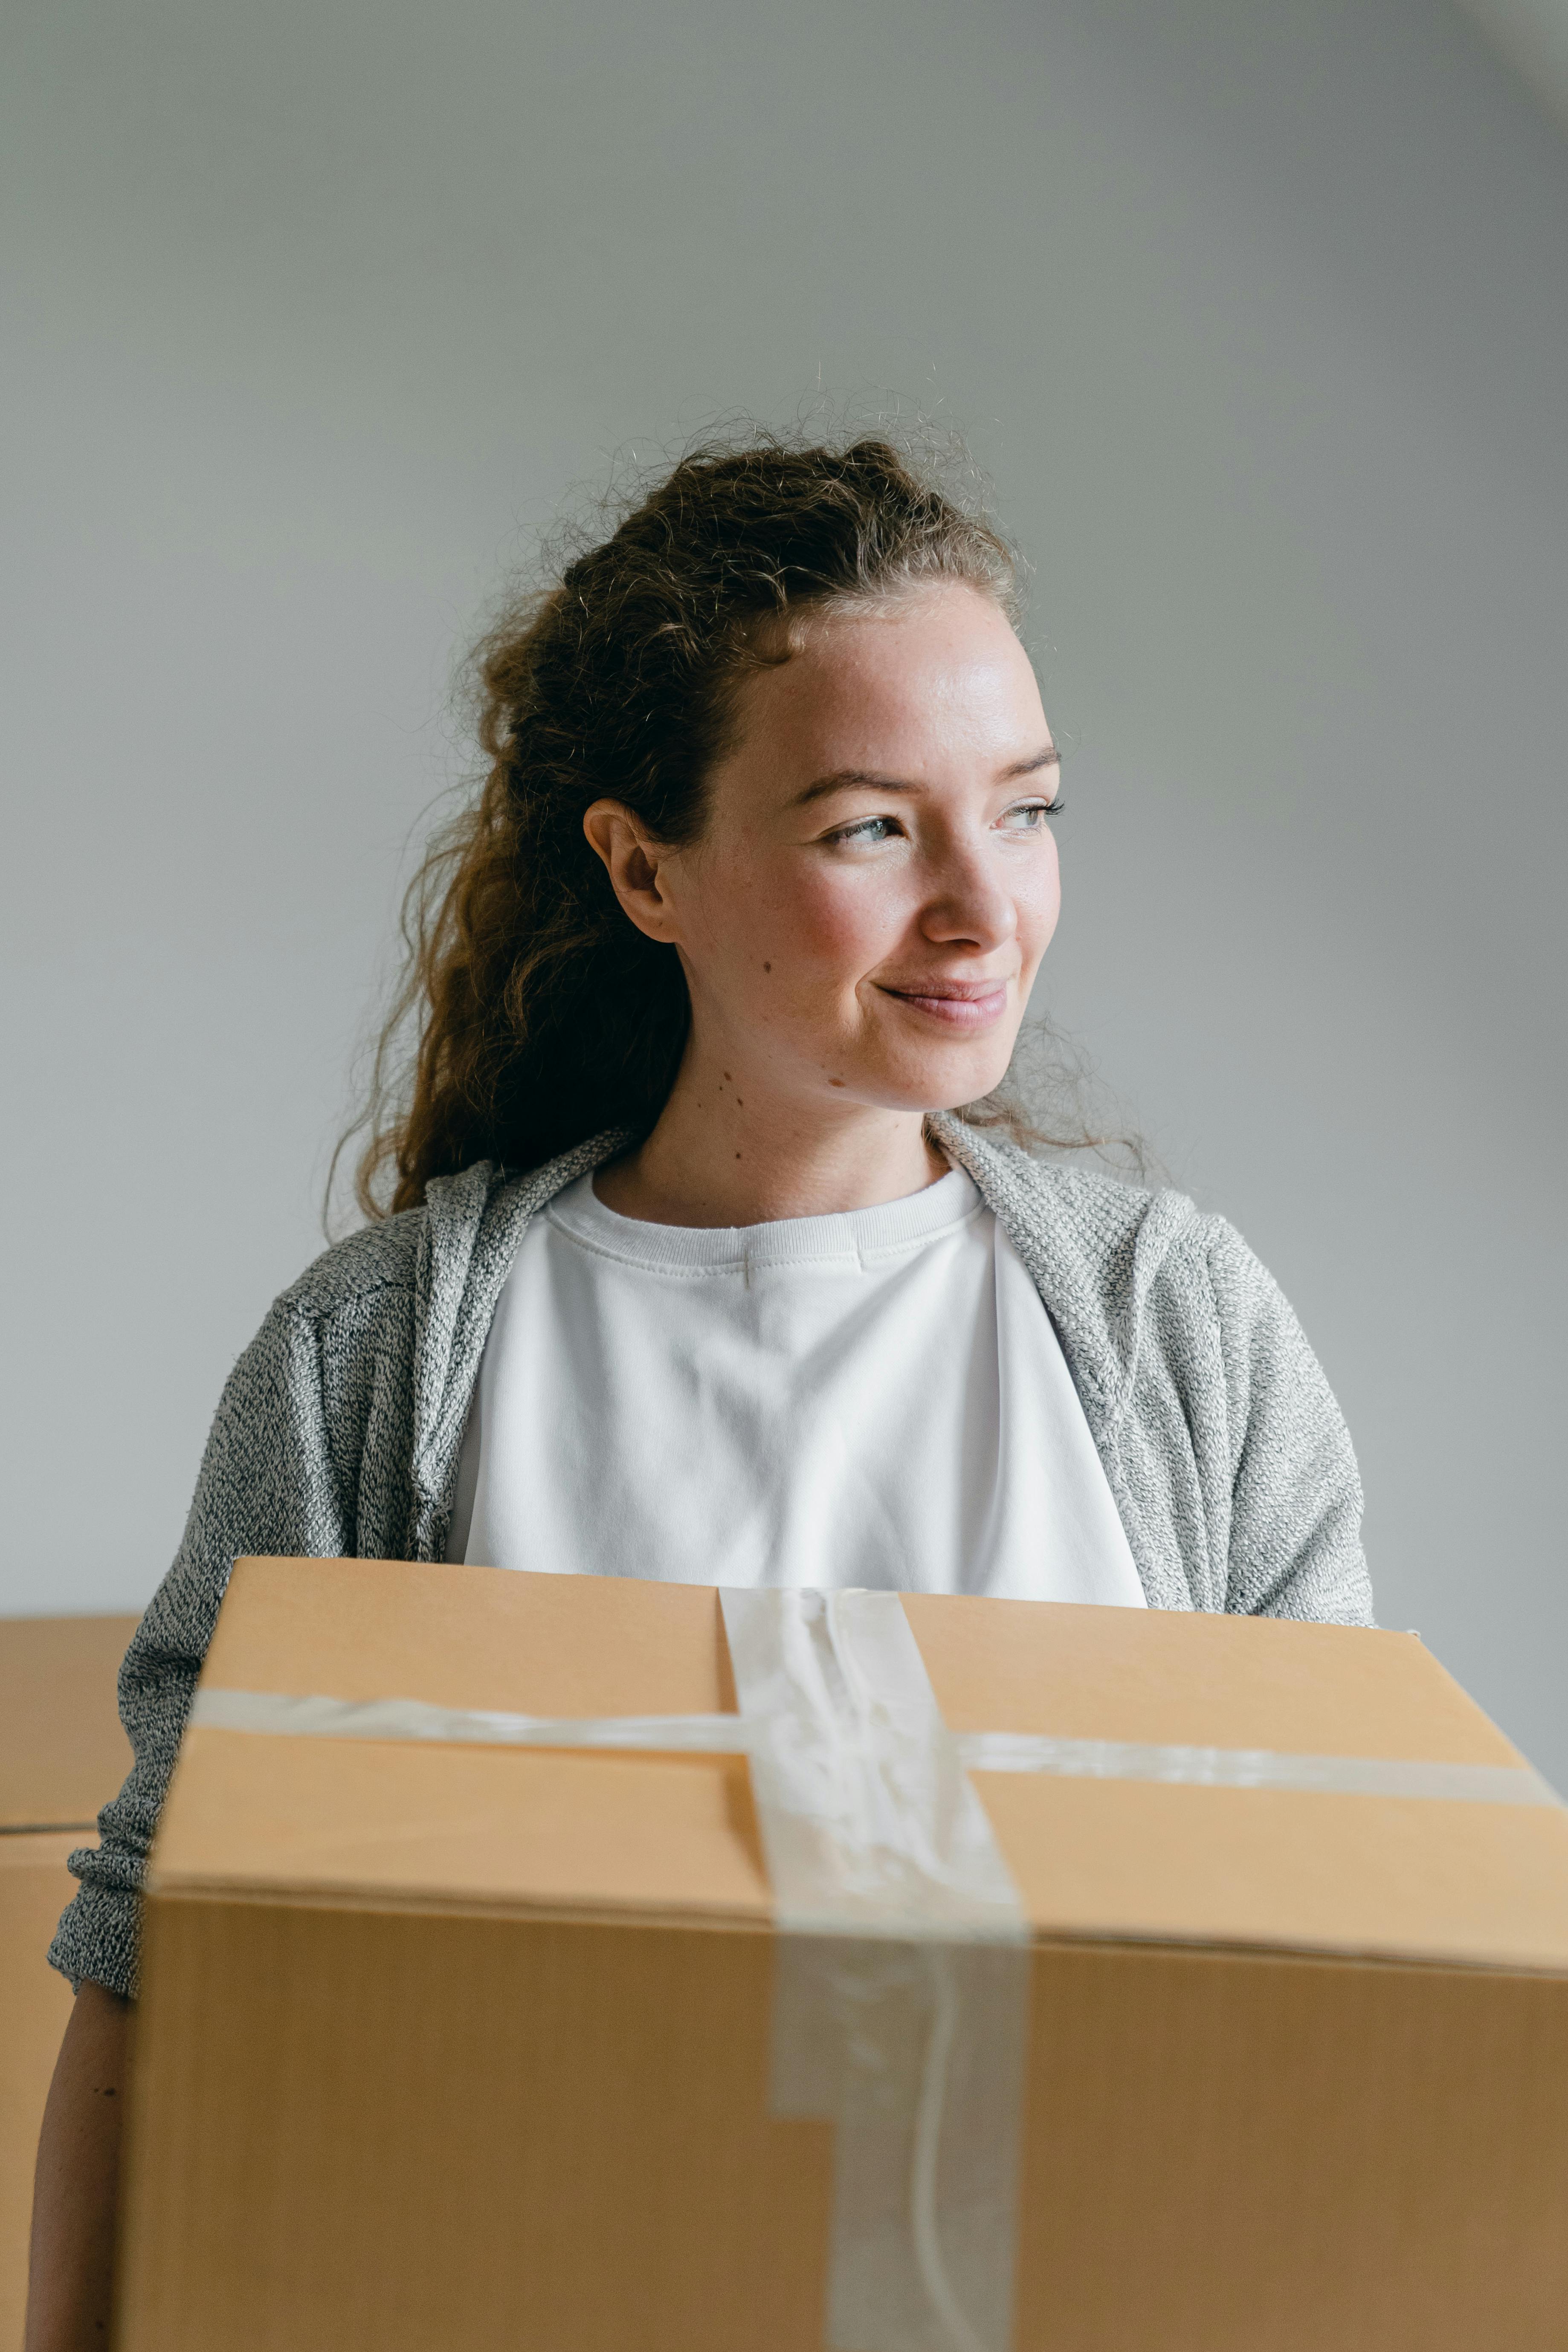 A smiling woman holding a taped box | Source: Pexels